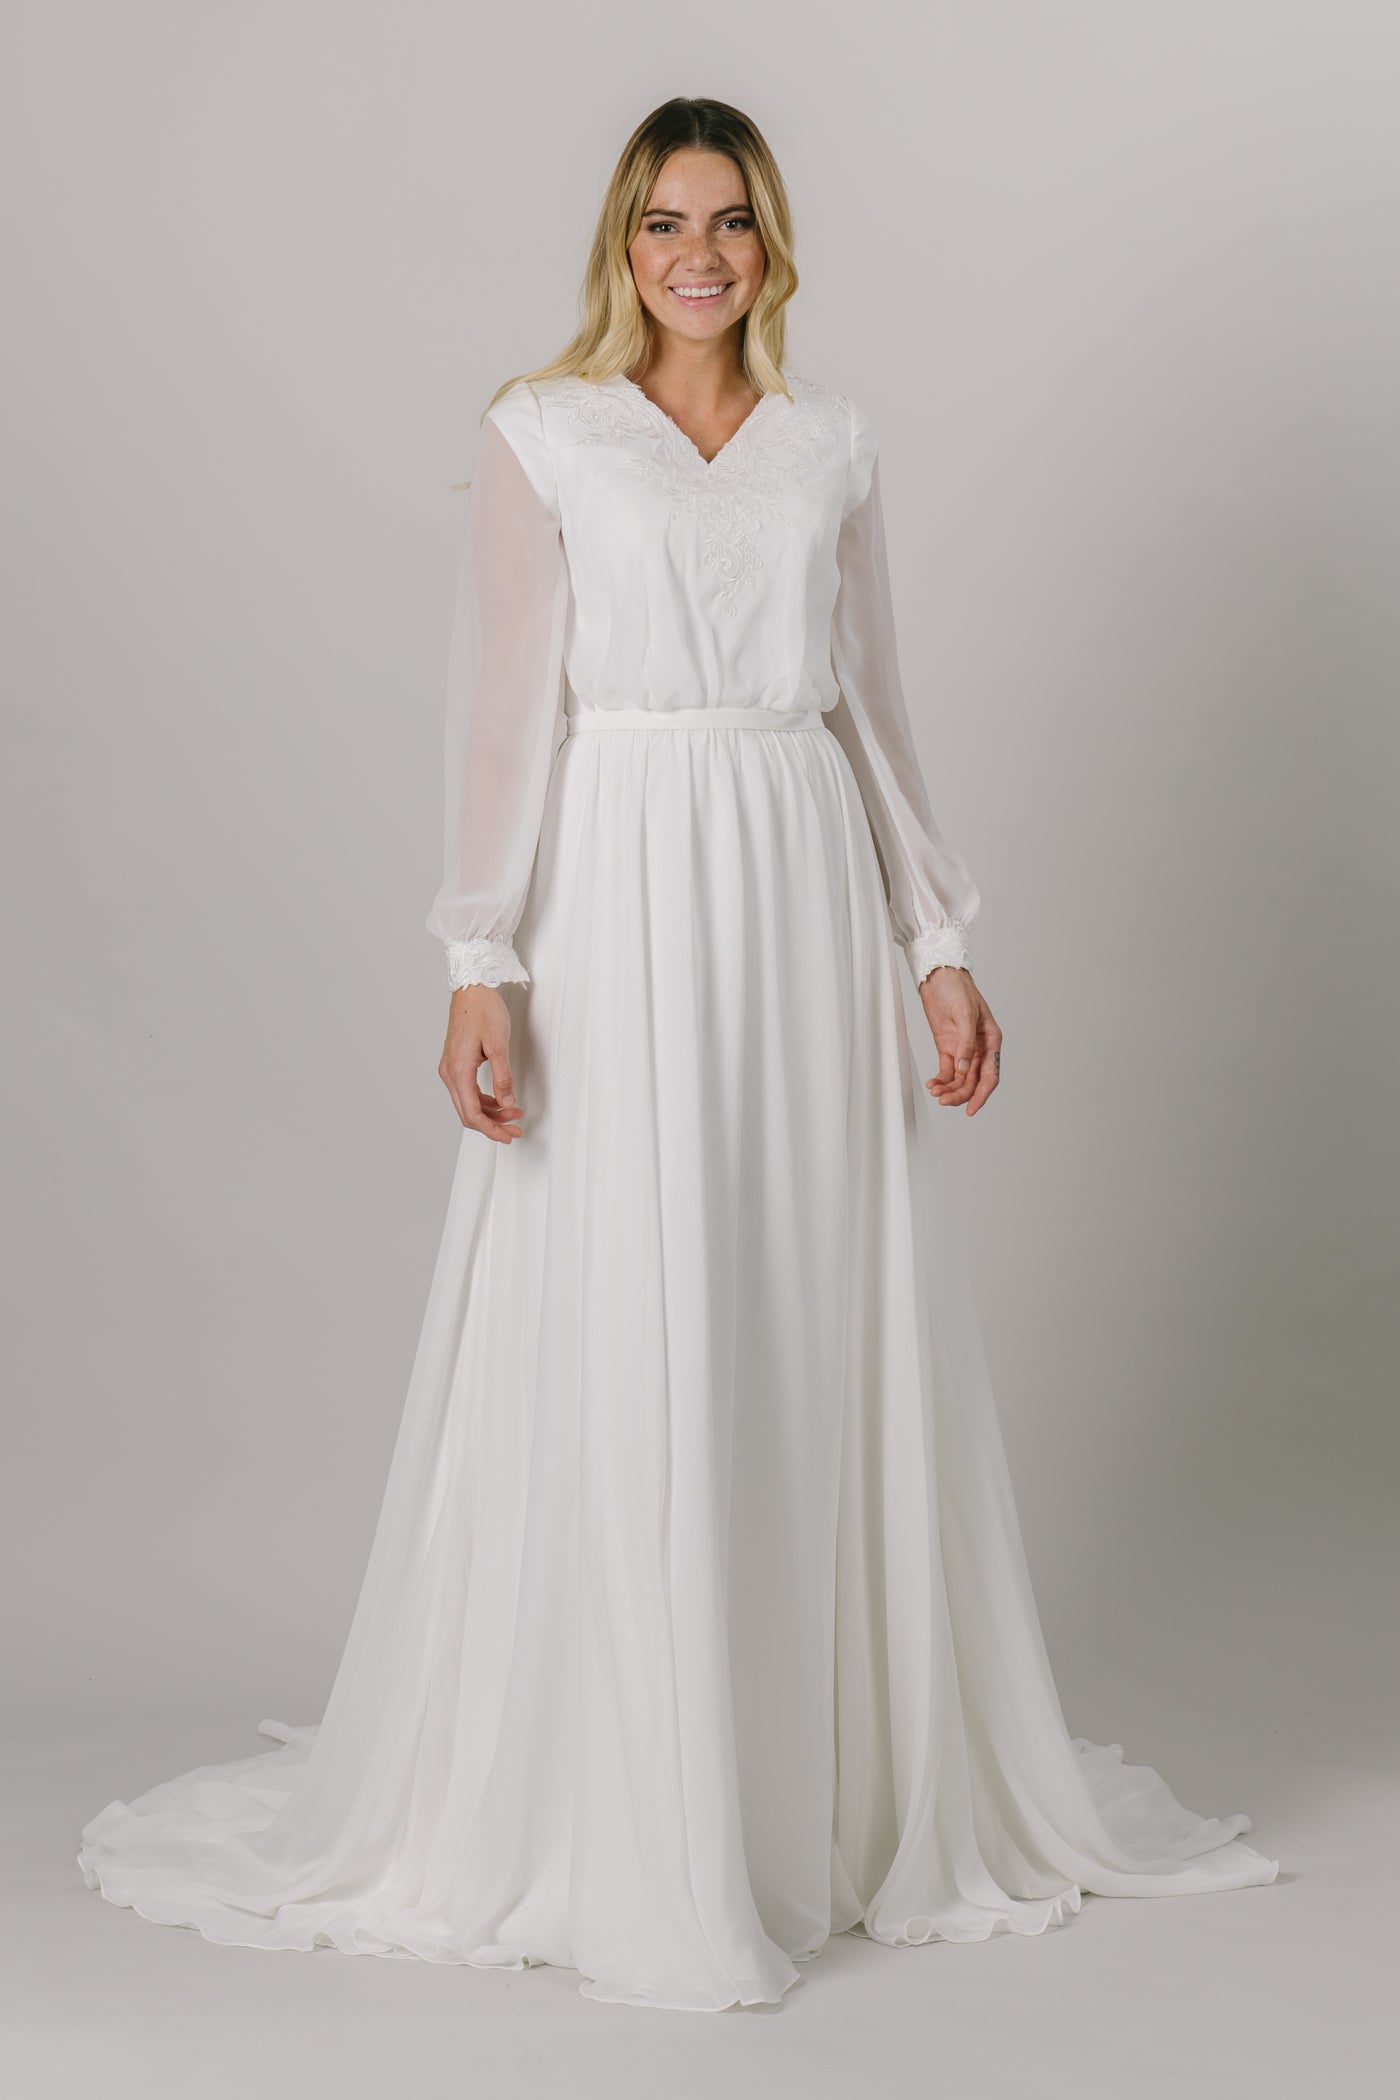 This long-sleeve modest wedding dress features a v-neckline, bishop sleeves, and an a-line fit that flatters every figure.   Style Love: Gorgeous shimmering lace around the neckline and sleeve cuffs!